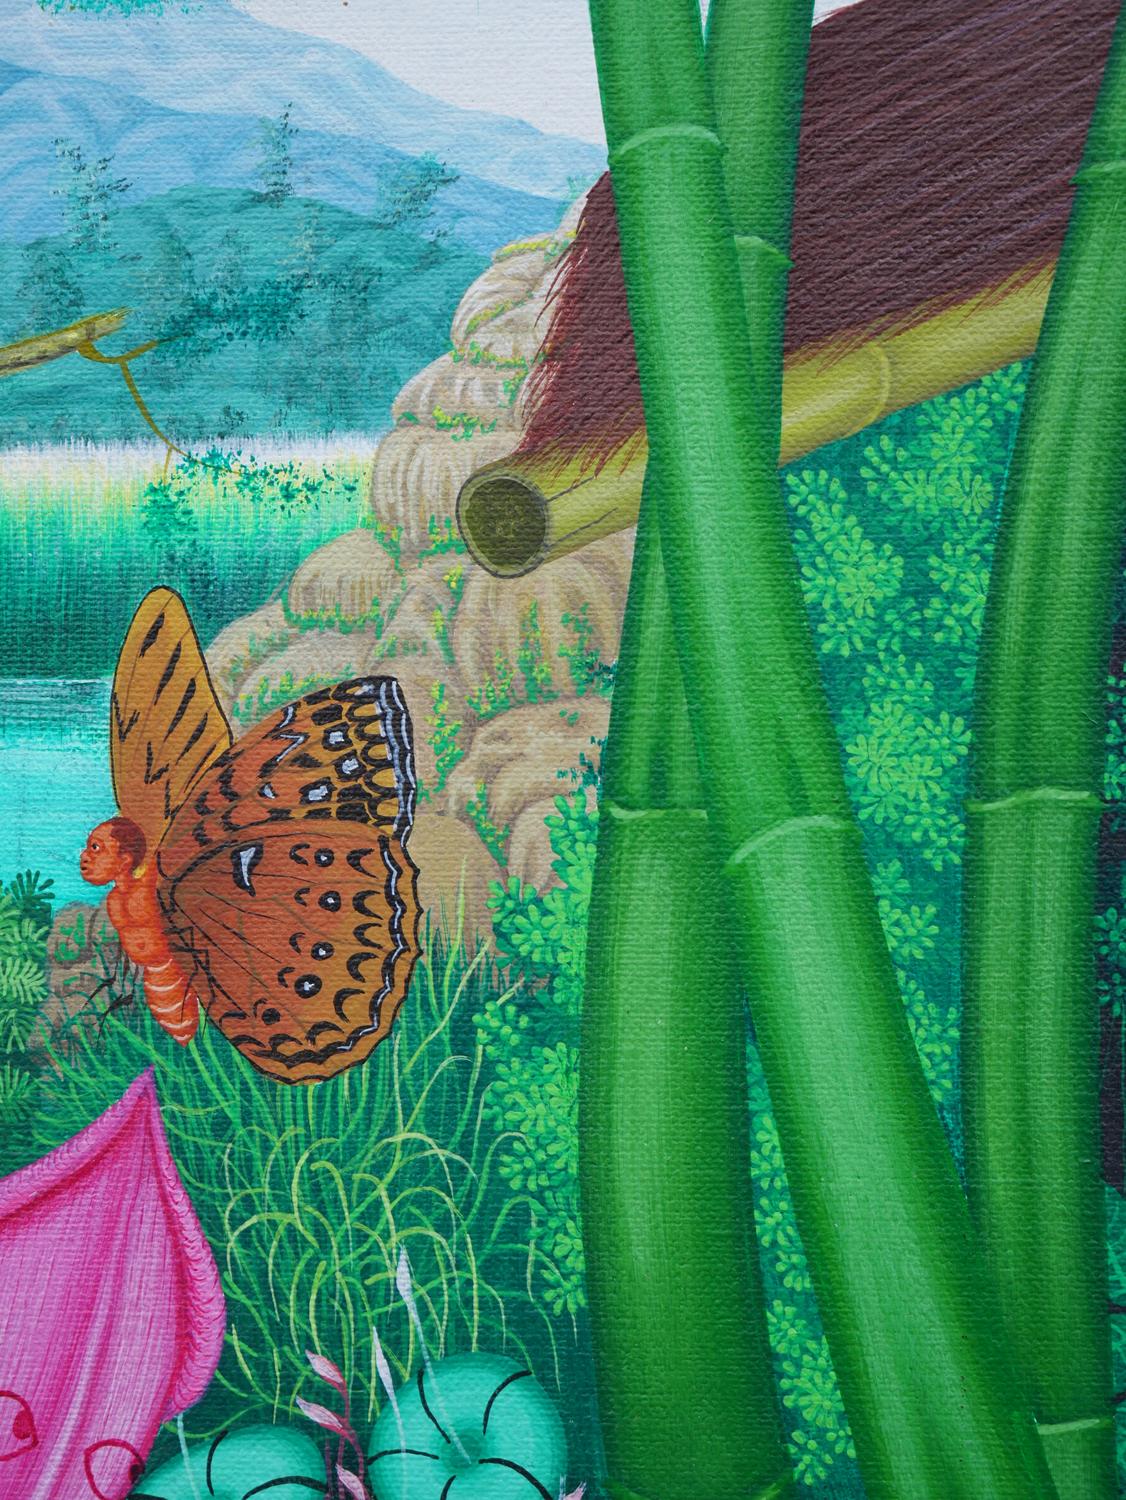 Colorful Tropical Jungle Landscape with Central Nude Female Figure 7